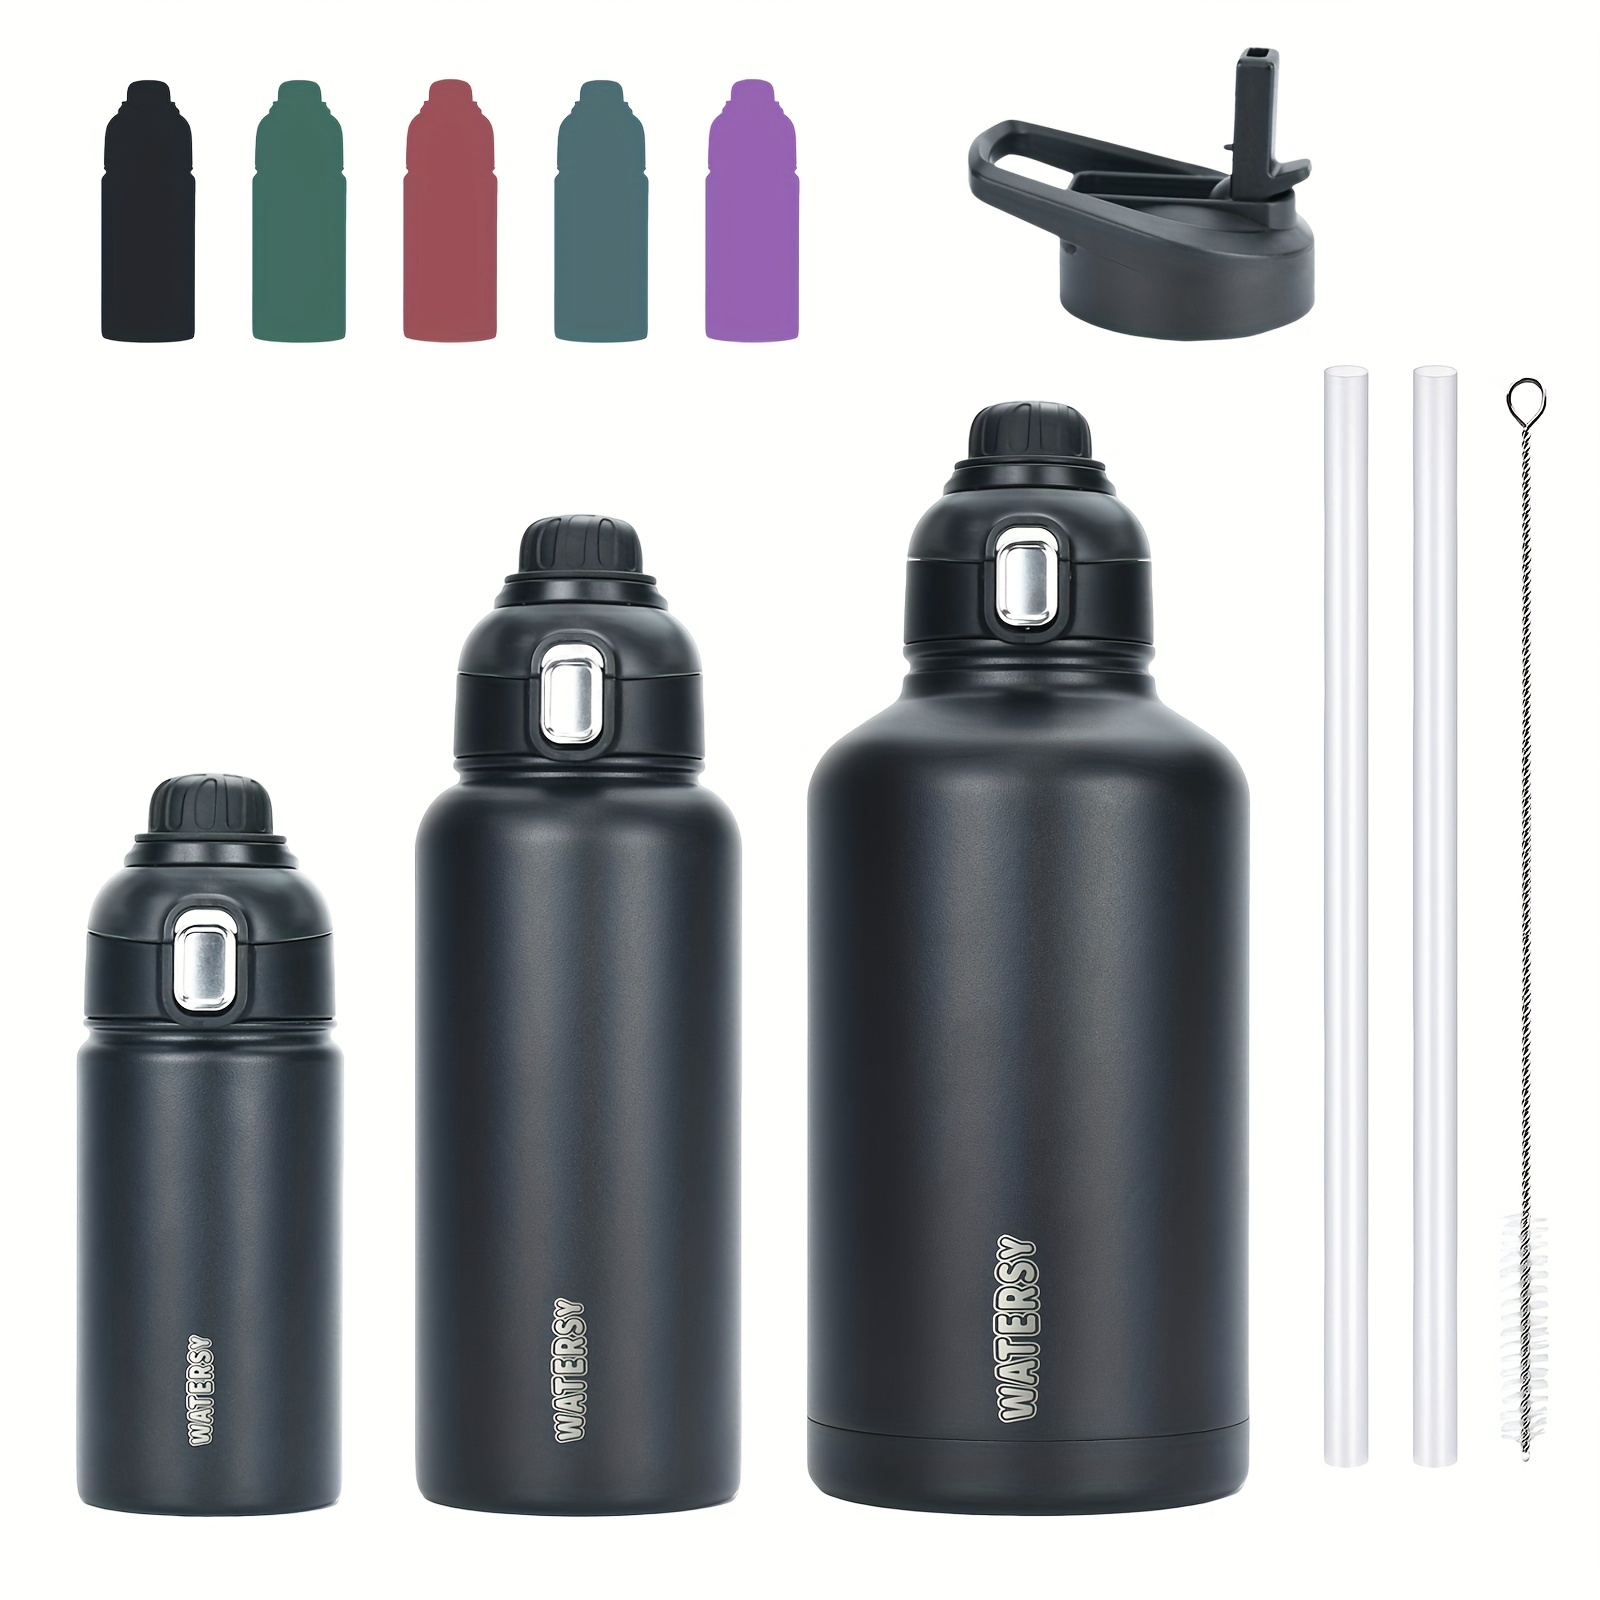 

1pc, 16oz/32oz/64oz Insulated Water Bottle With Straw & 2 Lids, Leak Proof Metal Water Jug, Hot Cold Stainless Steel Thermal Water Bottles, Half Gallon Large Water Flask For Sports, Gym